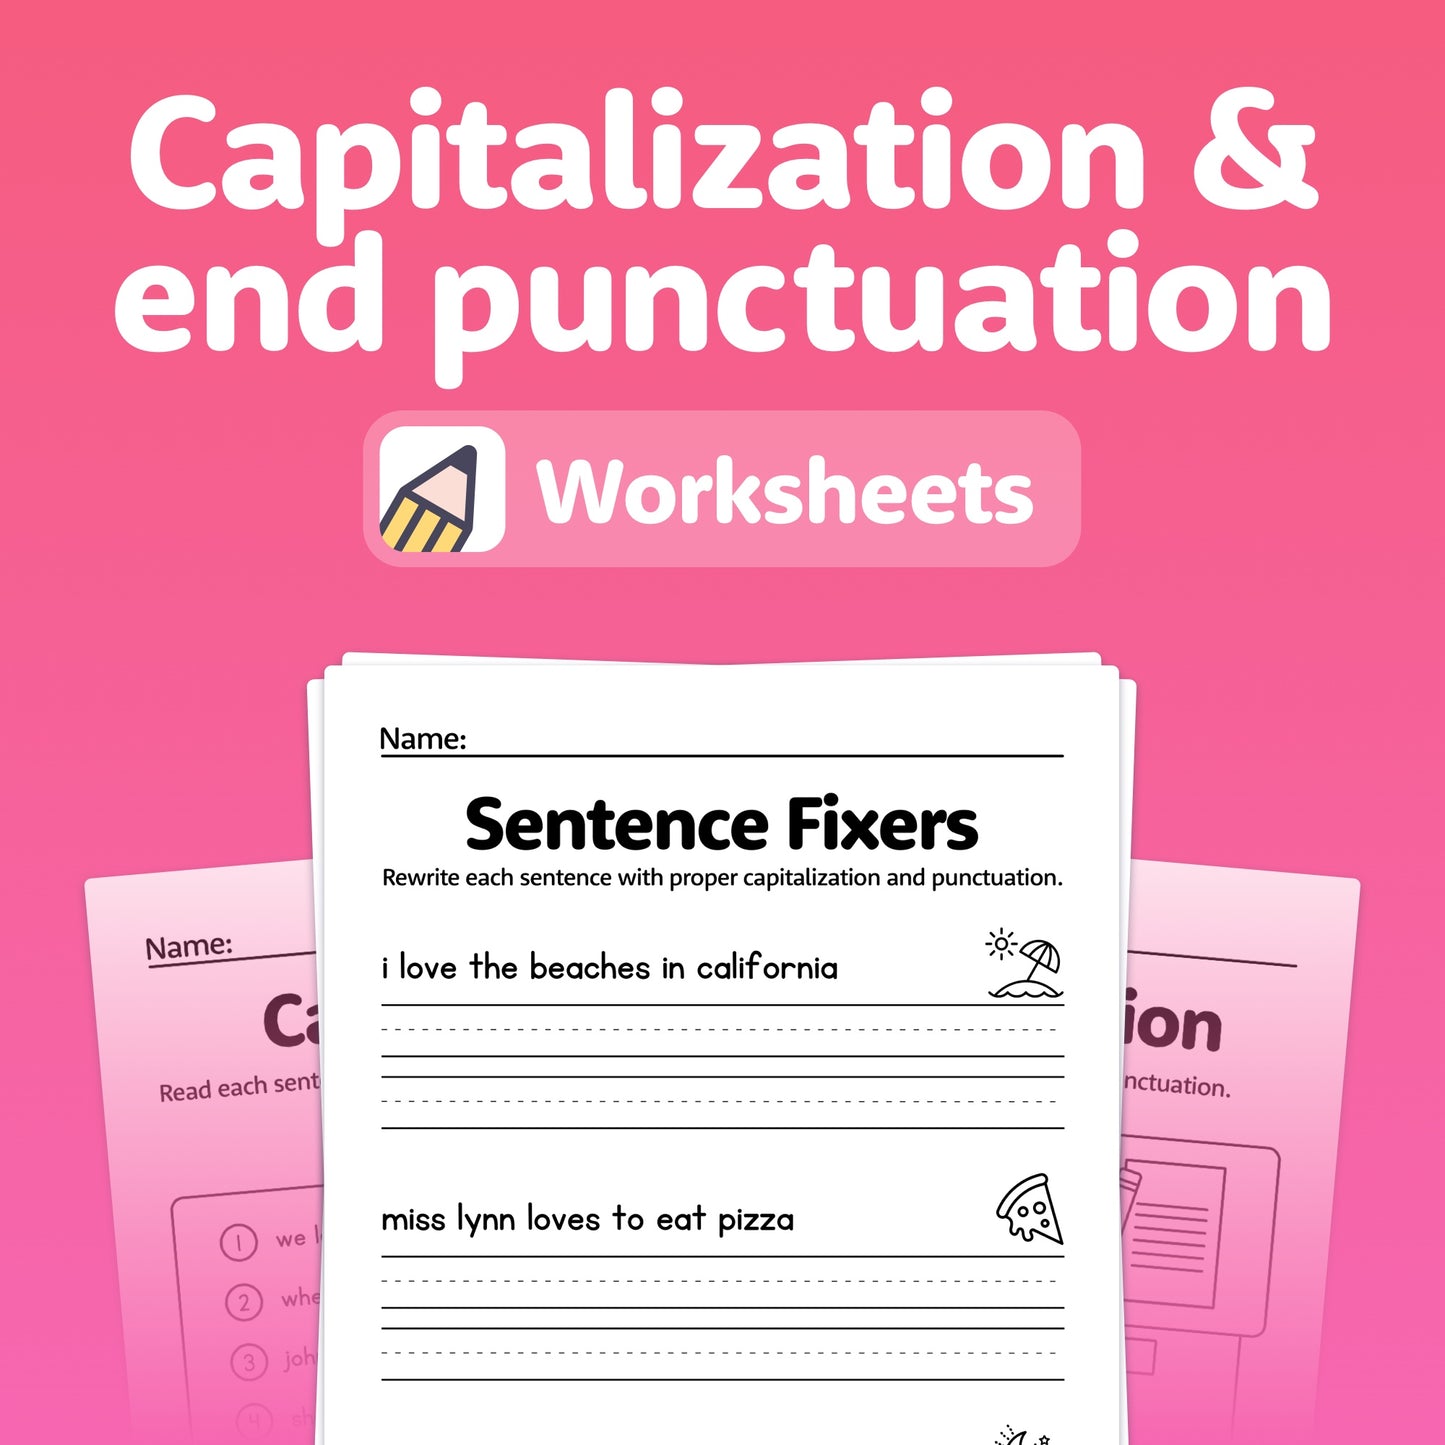 Capitalization and end punctuation worksheets